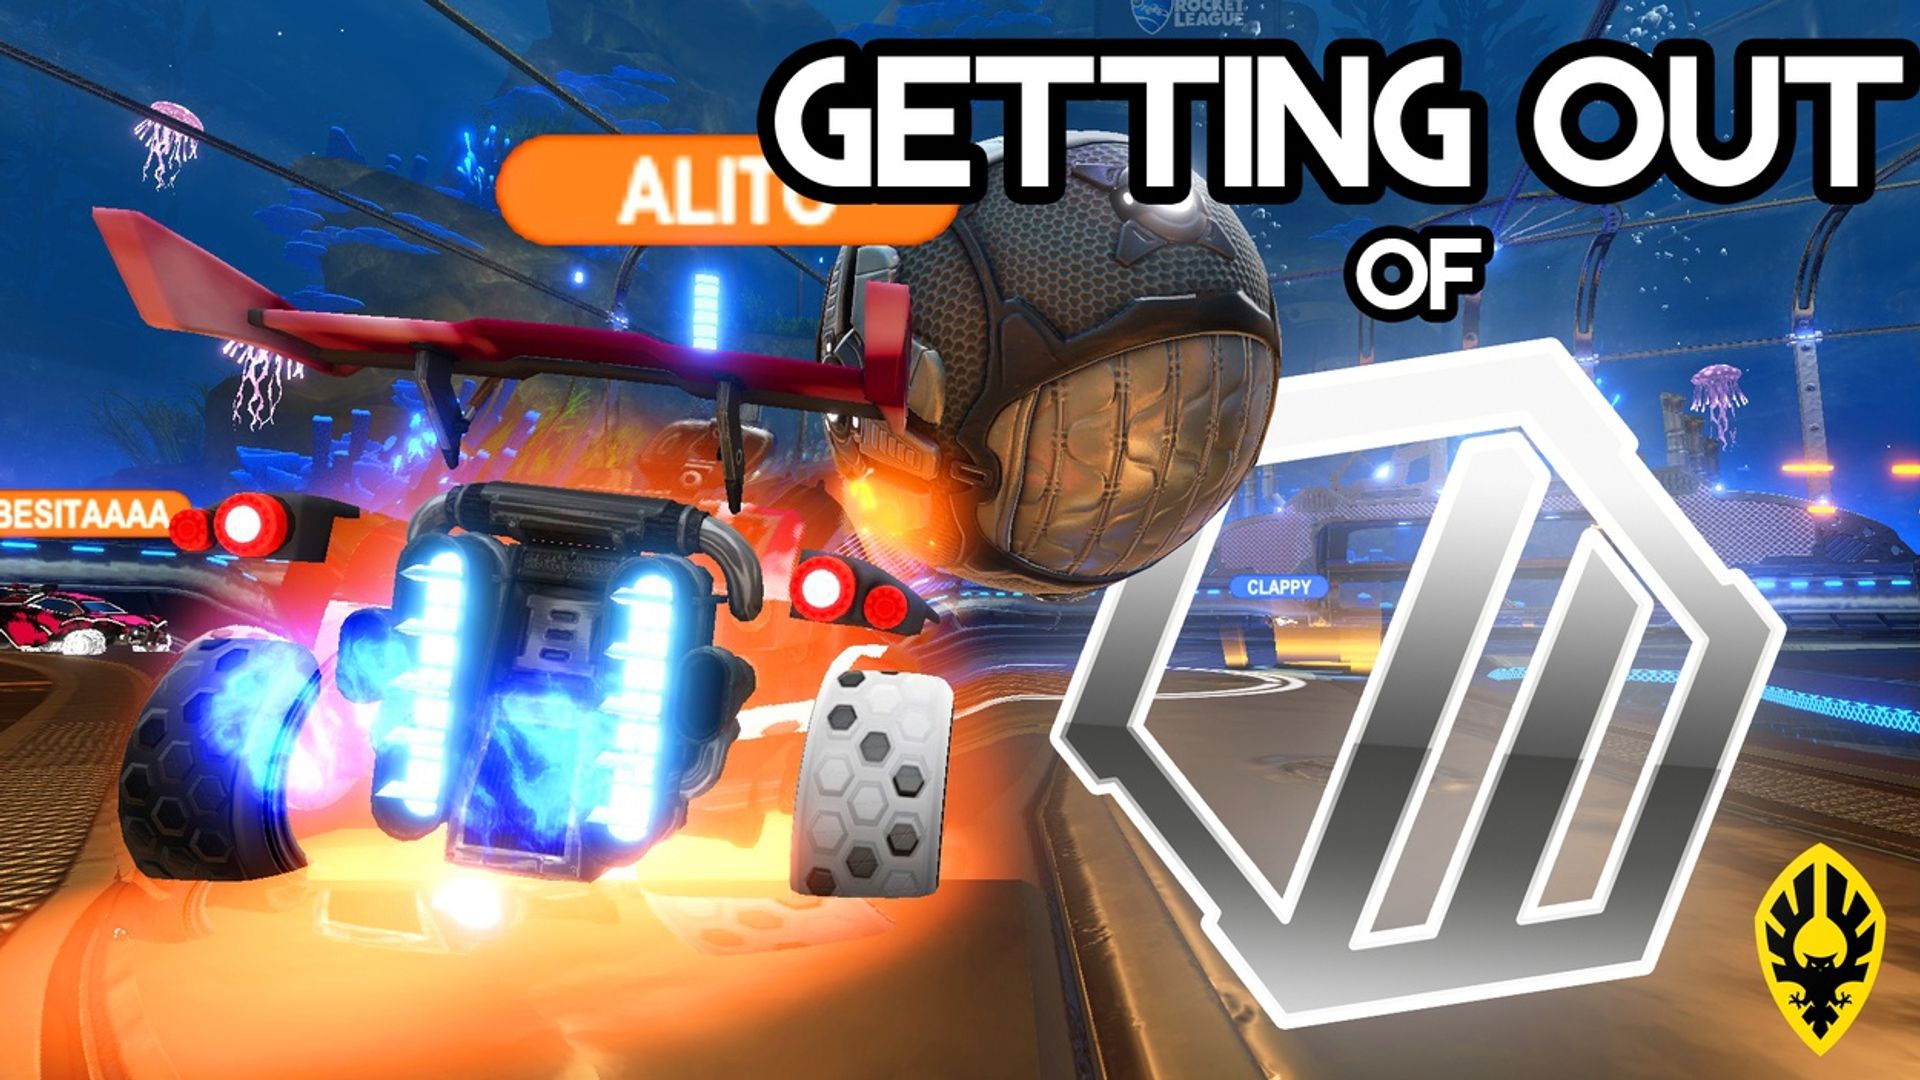 Essential Tips To Get Out Of Silver - A Rocket League Guide